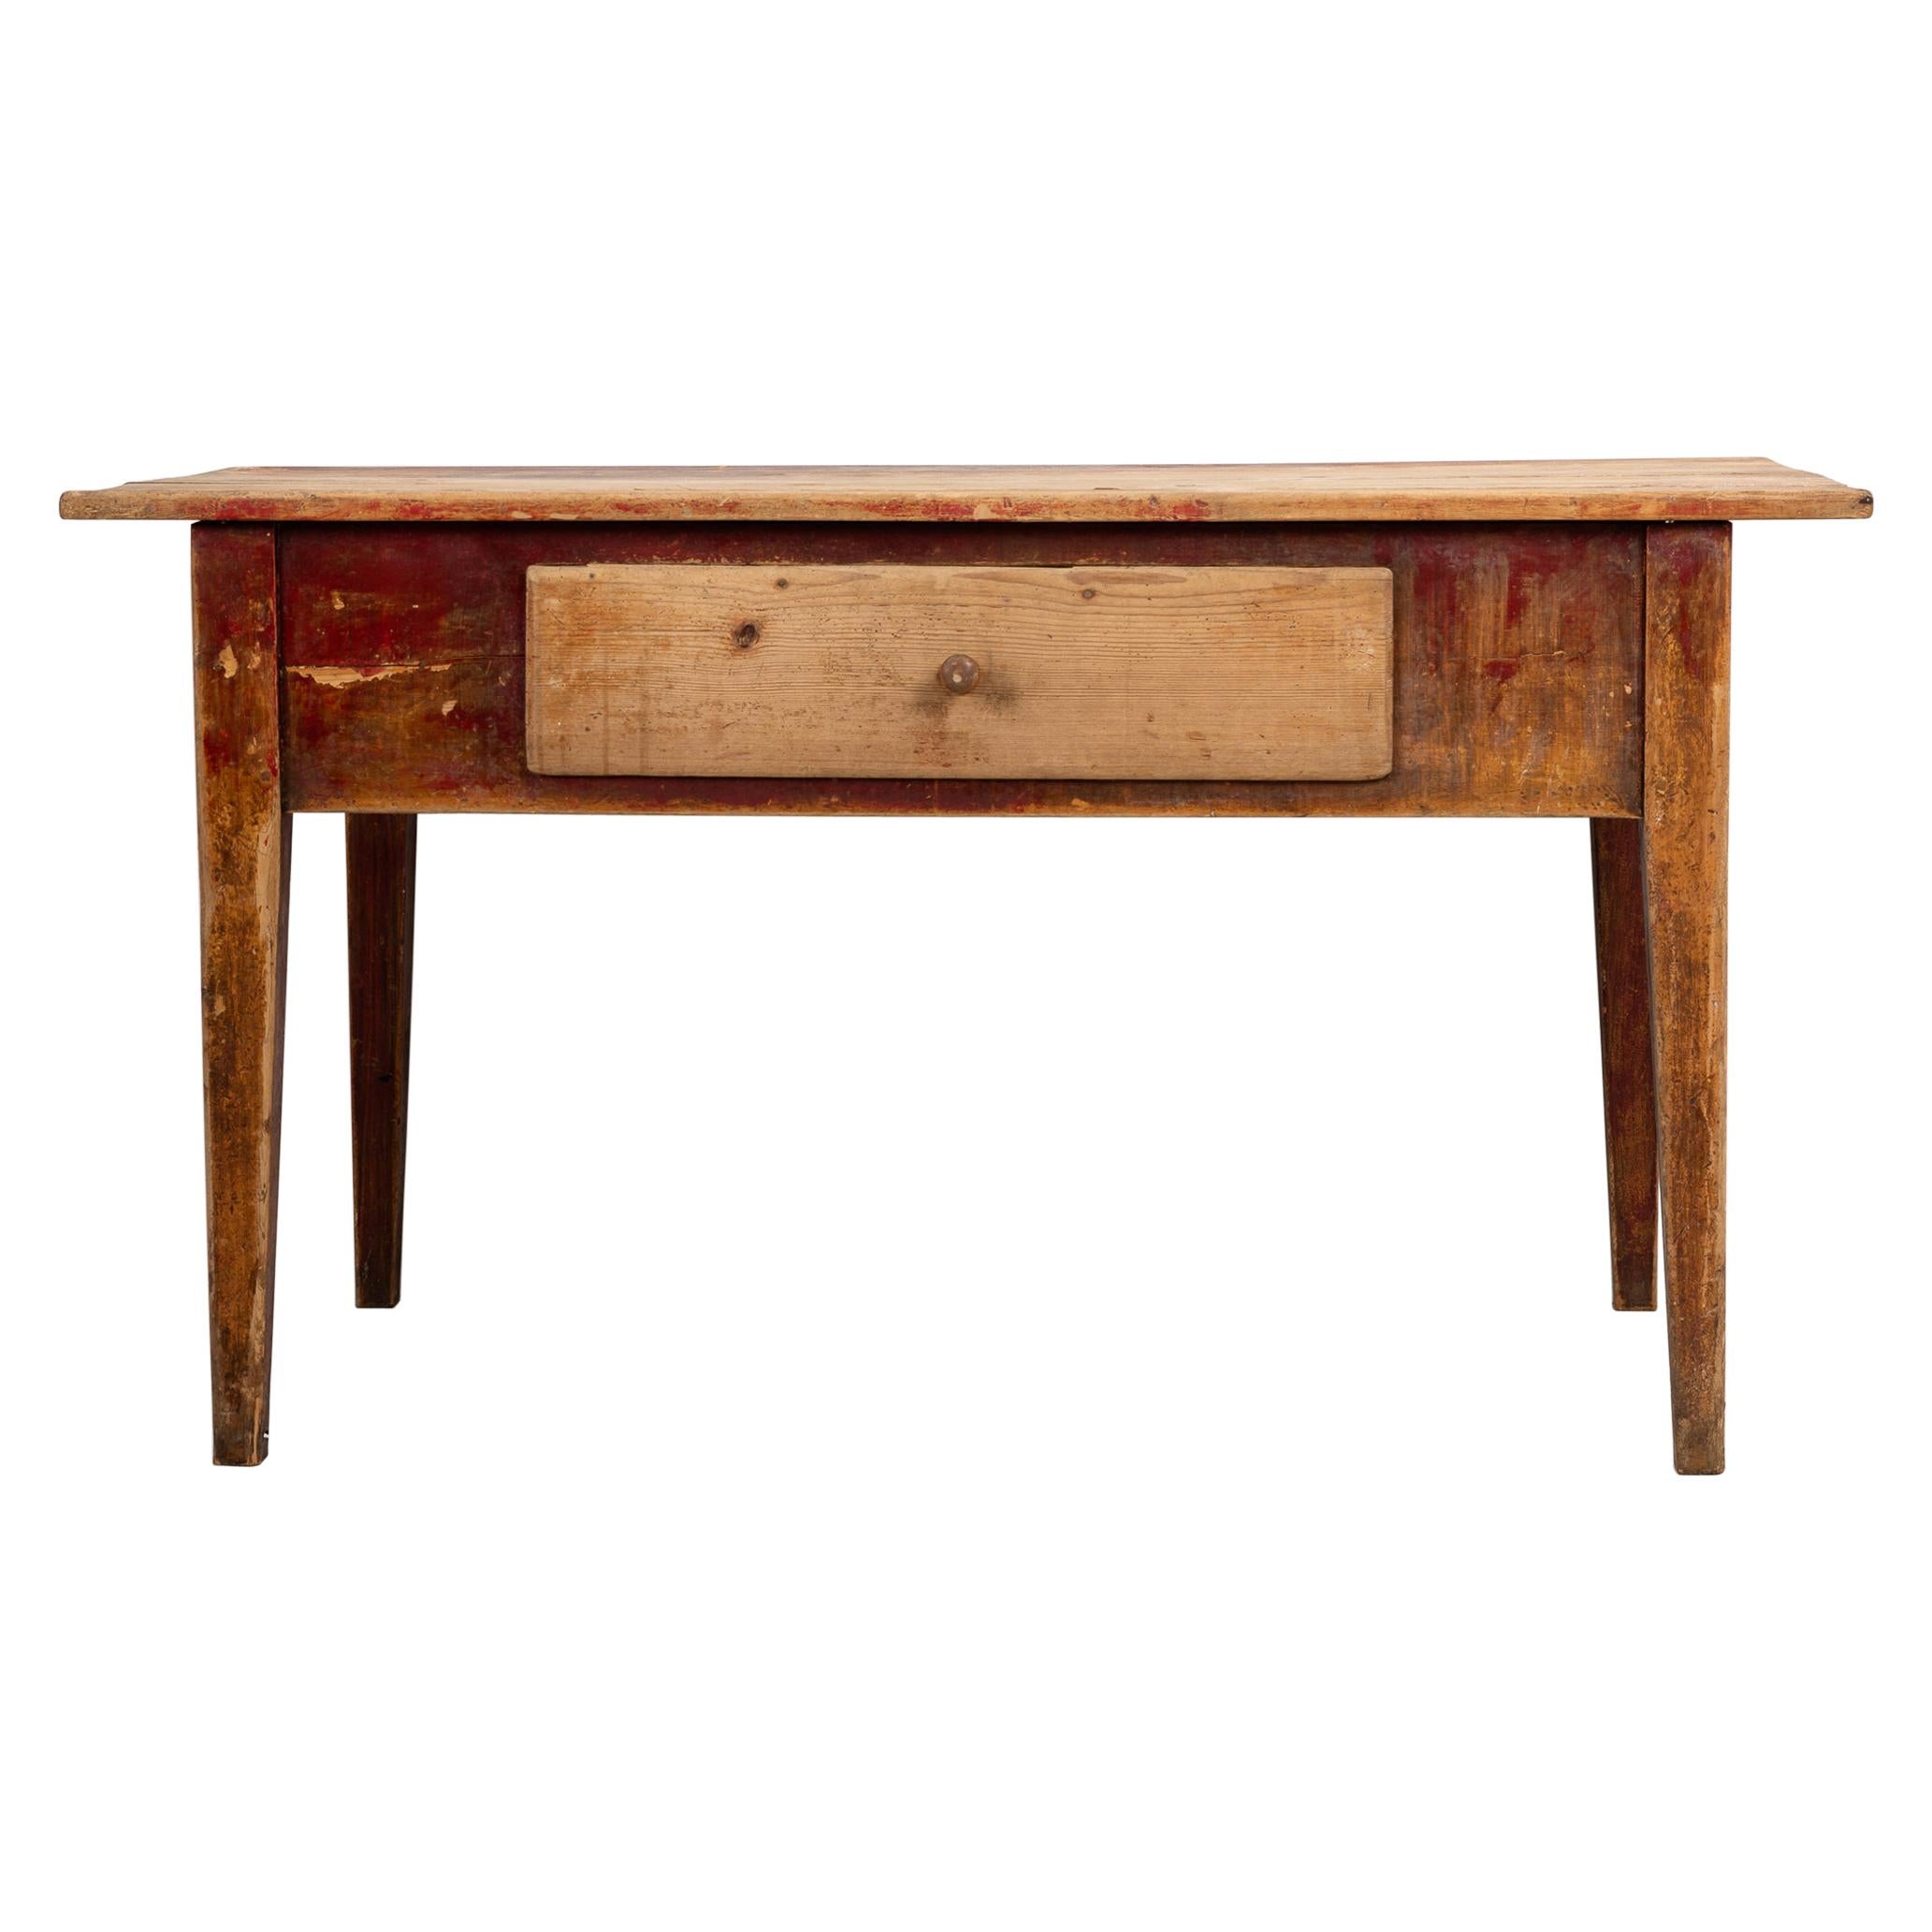 Early 19th Century Swedish Gustavian Style Country Work Table For Sale